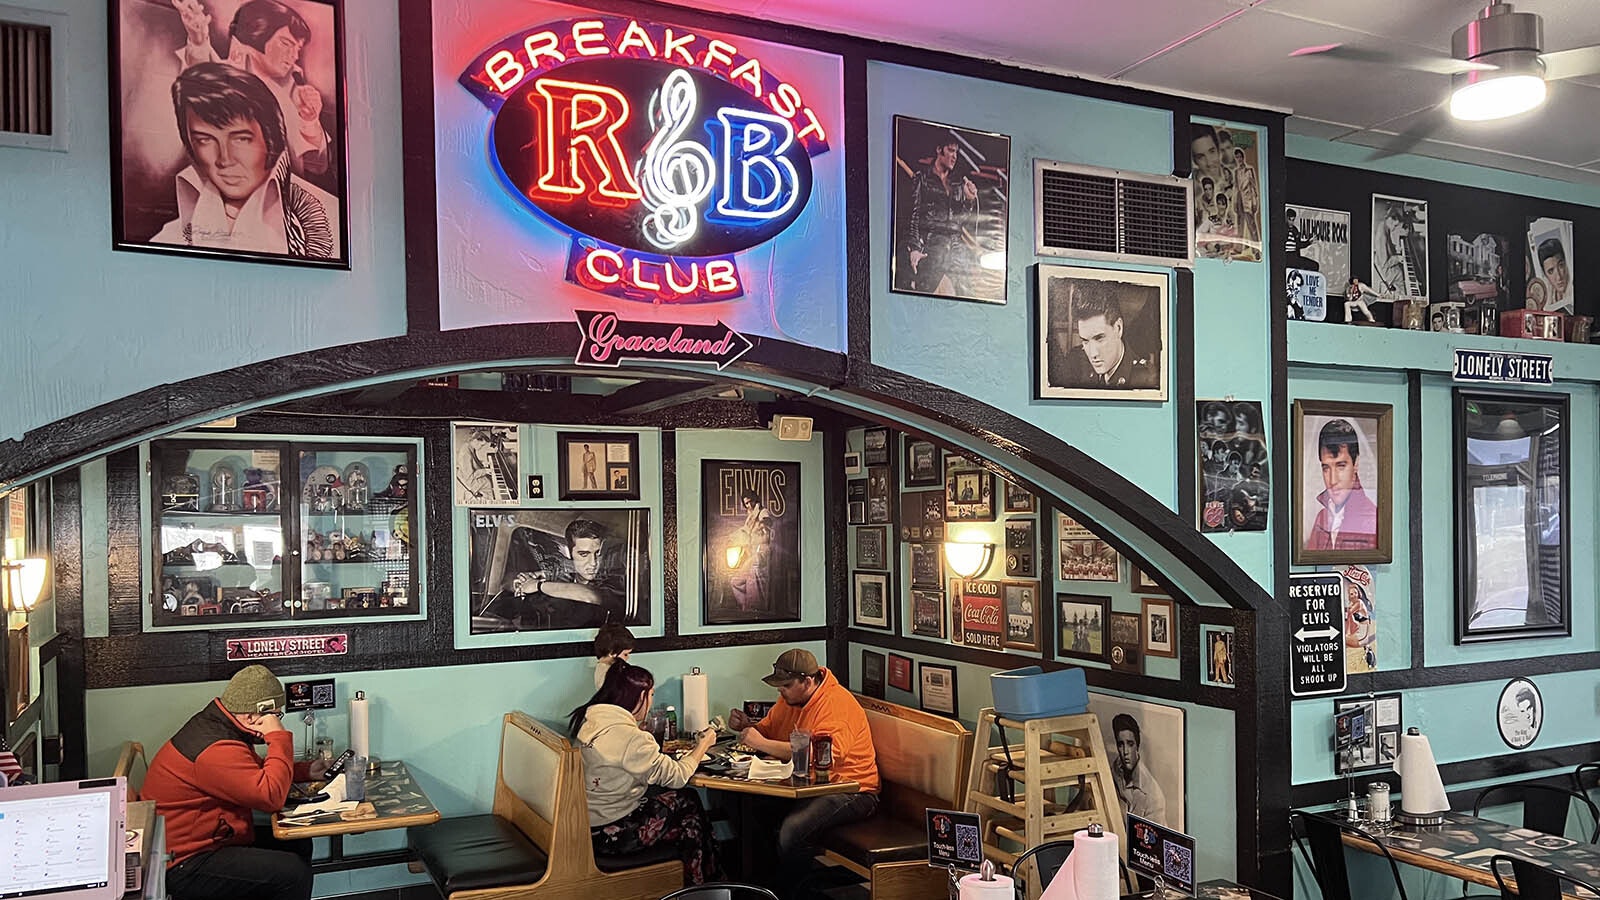 At the R&B Breakfast Club on Lincolnway in Cheyenne, it's always 1957 and Elvis — the King of Rock 'n' Roll — still rules.